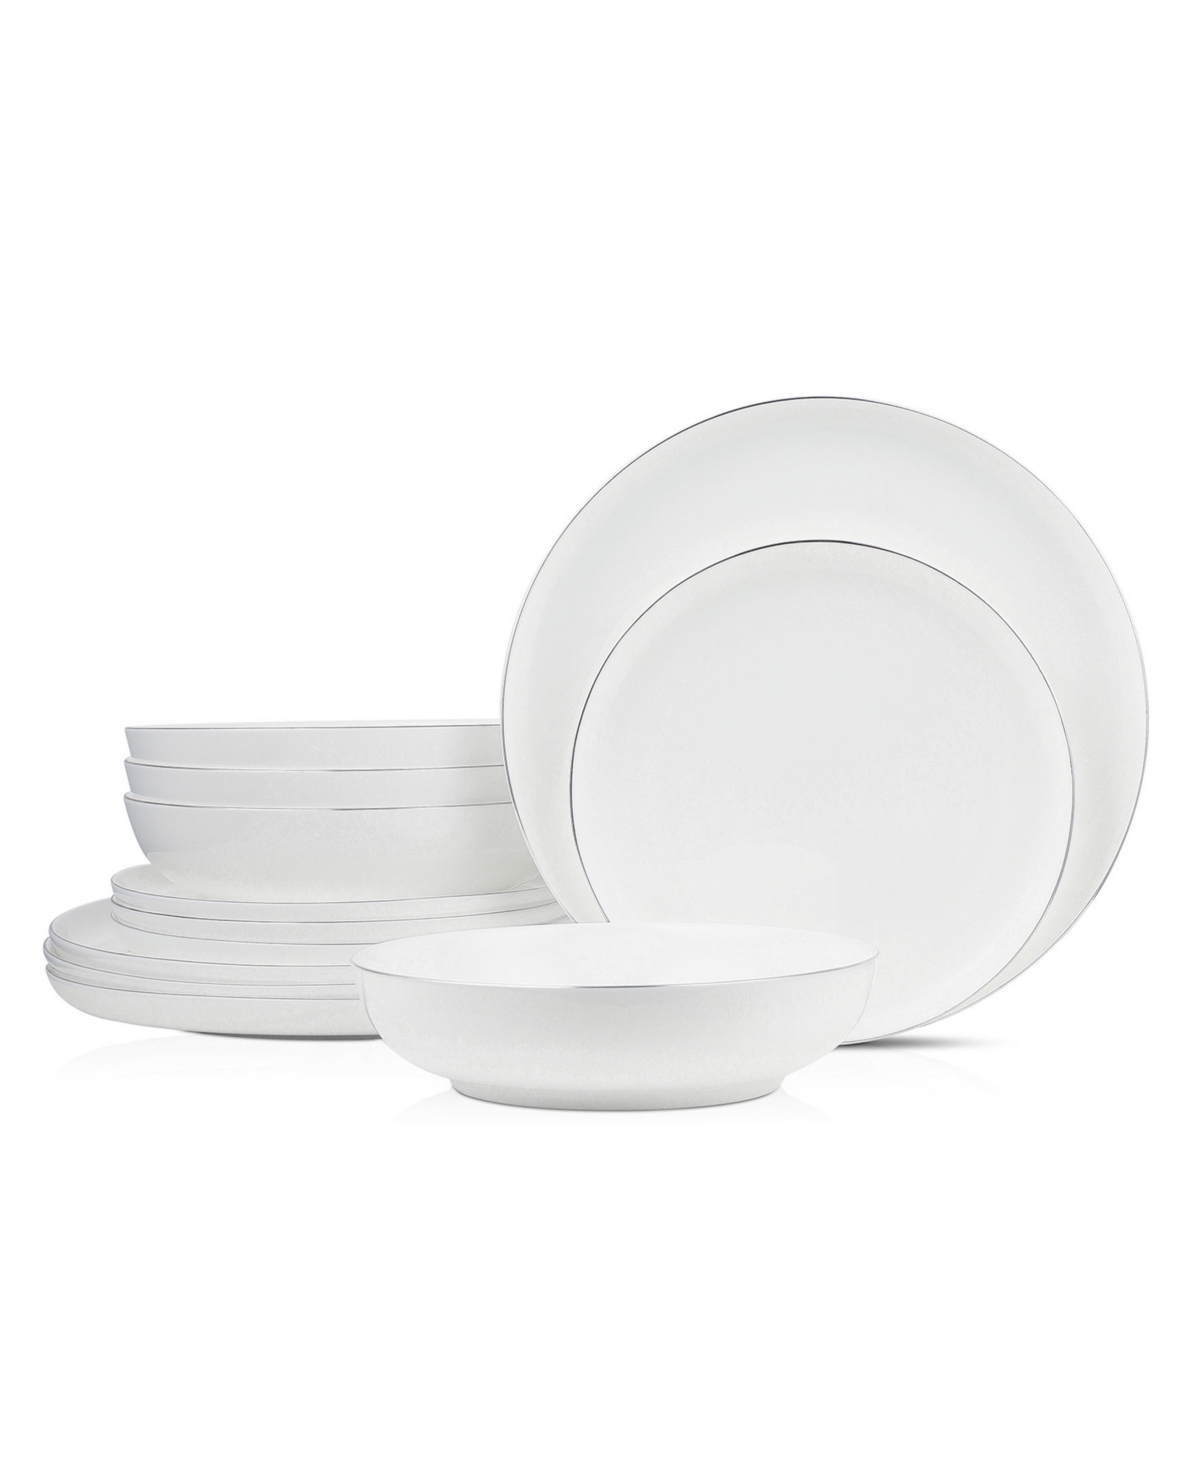 Stone Lain Gabrielle 24 Piece Dinnerware Set, Service For 8 In White And Platinum